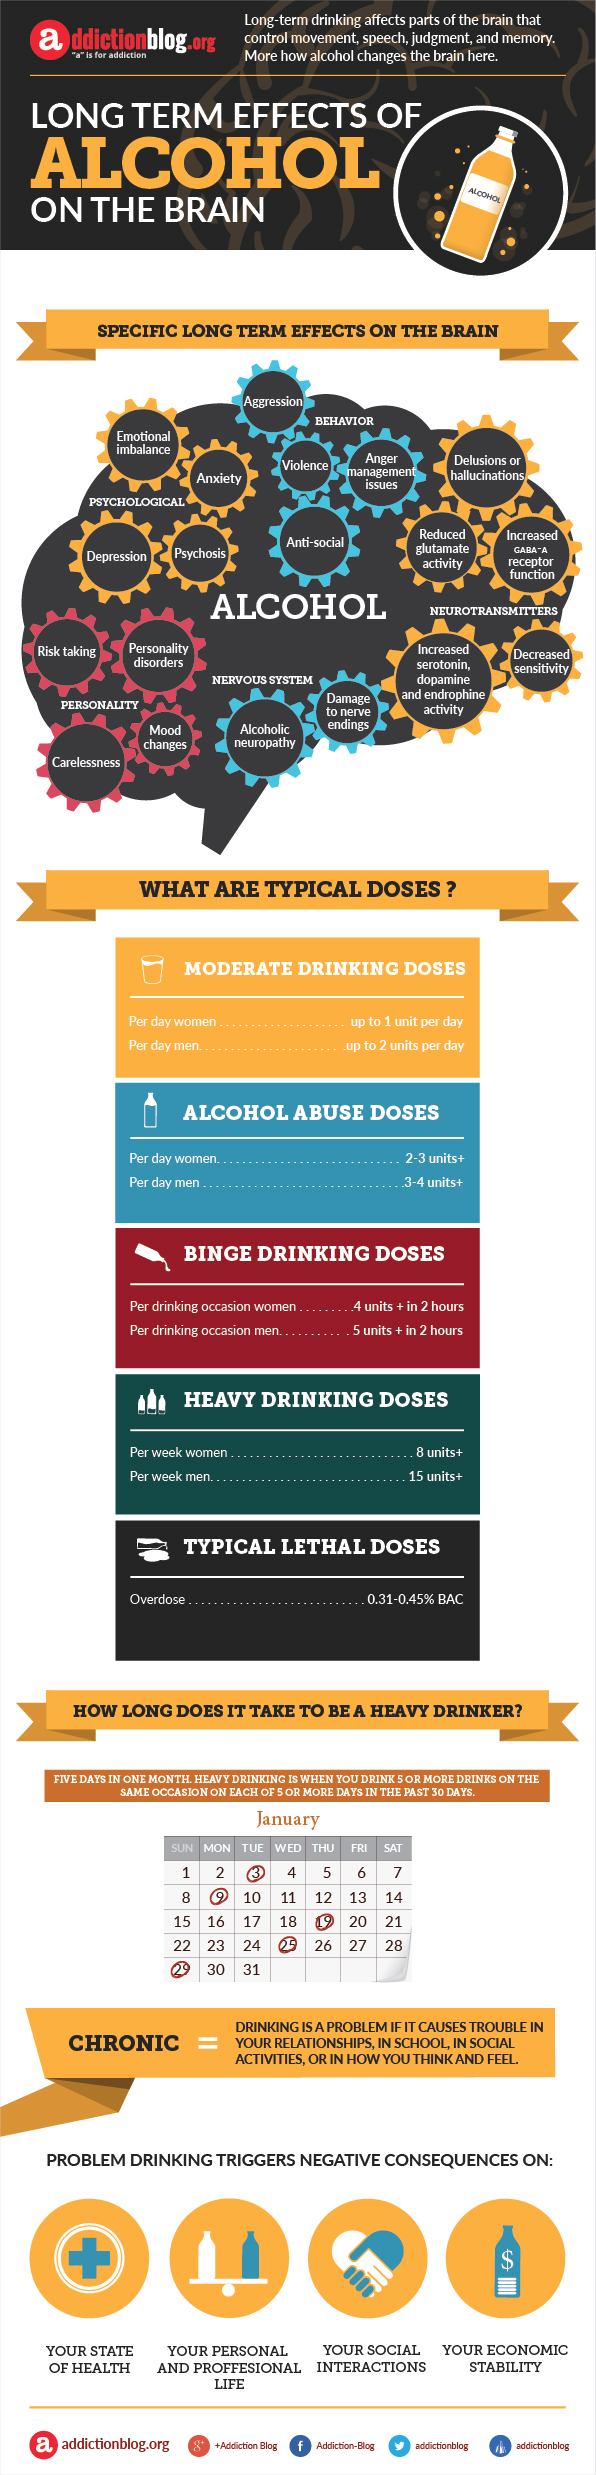 Negative brain effects from prolonged alcohol abuse  (INFOGRAPHIC)